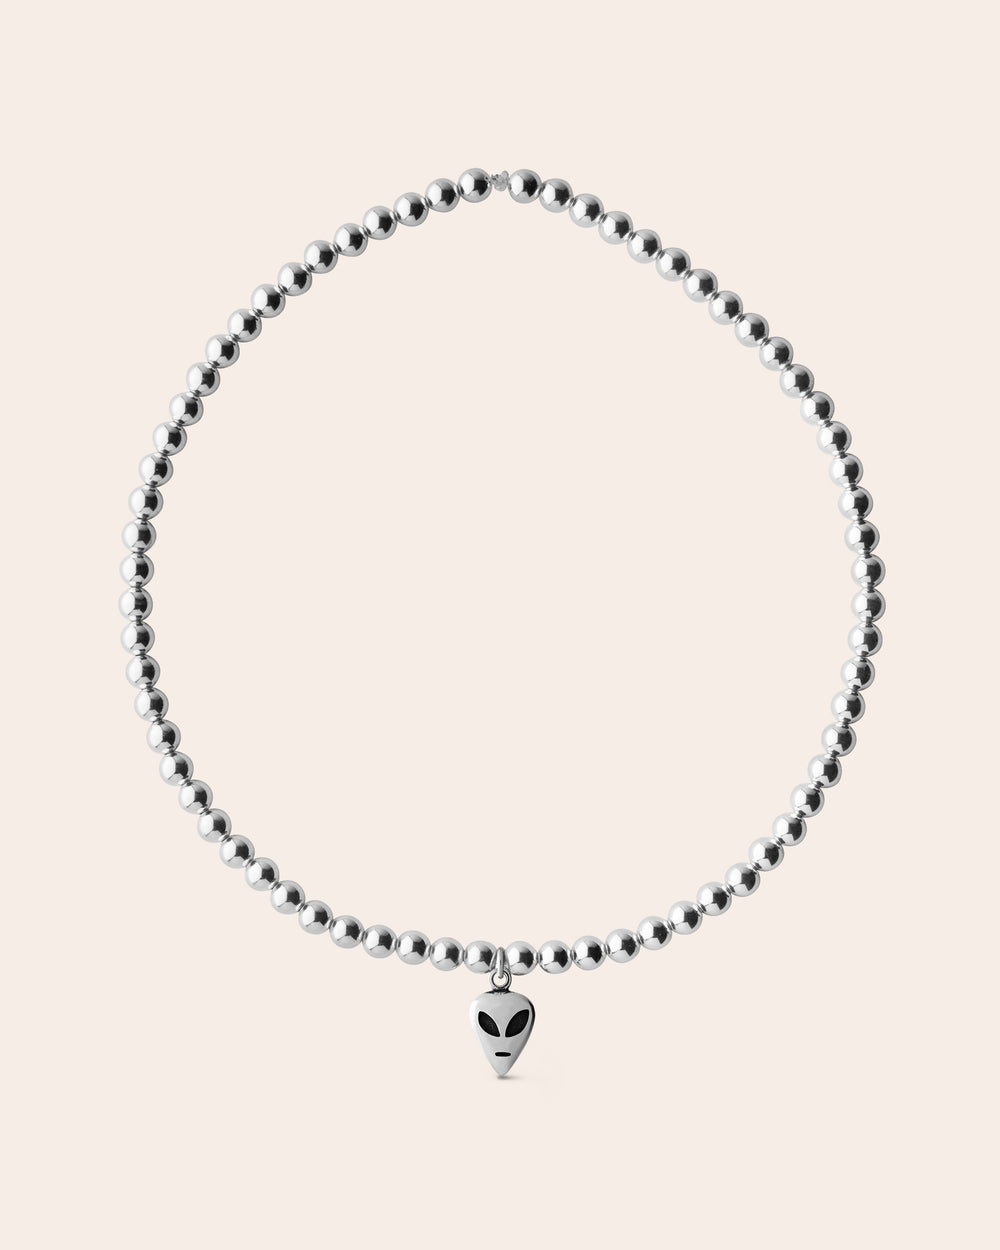 AG47 with Space Invader - Silver Balls Beaded Choker Necklace